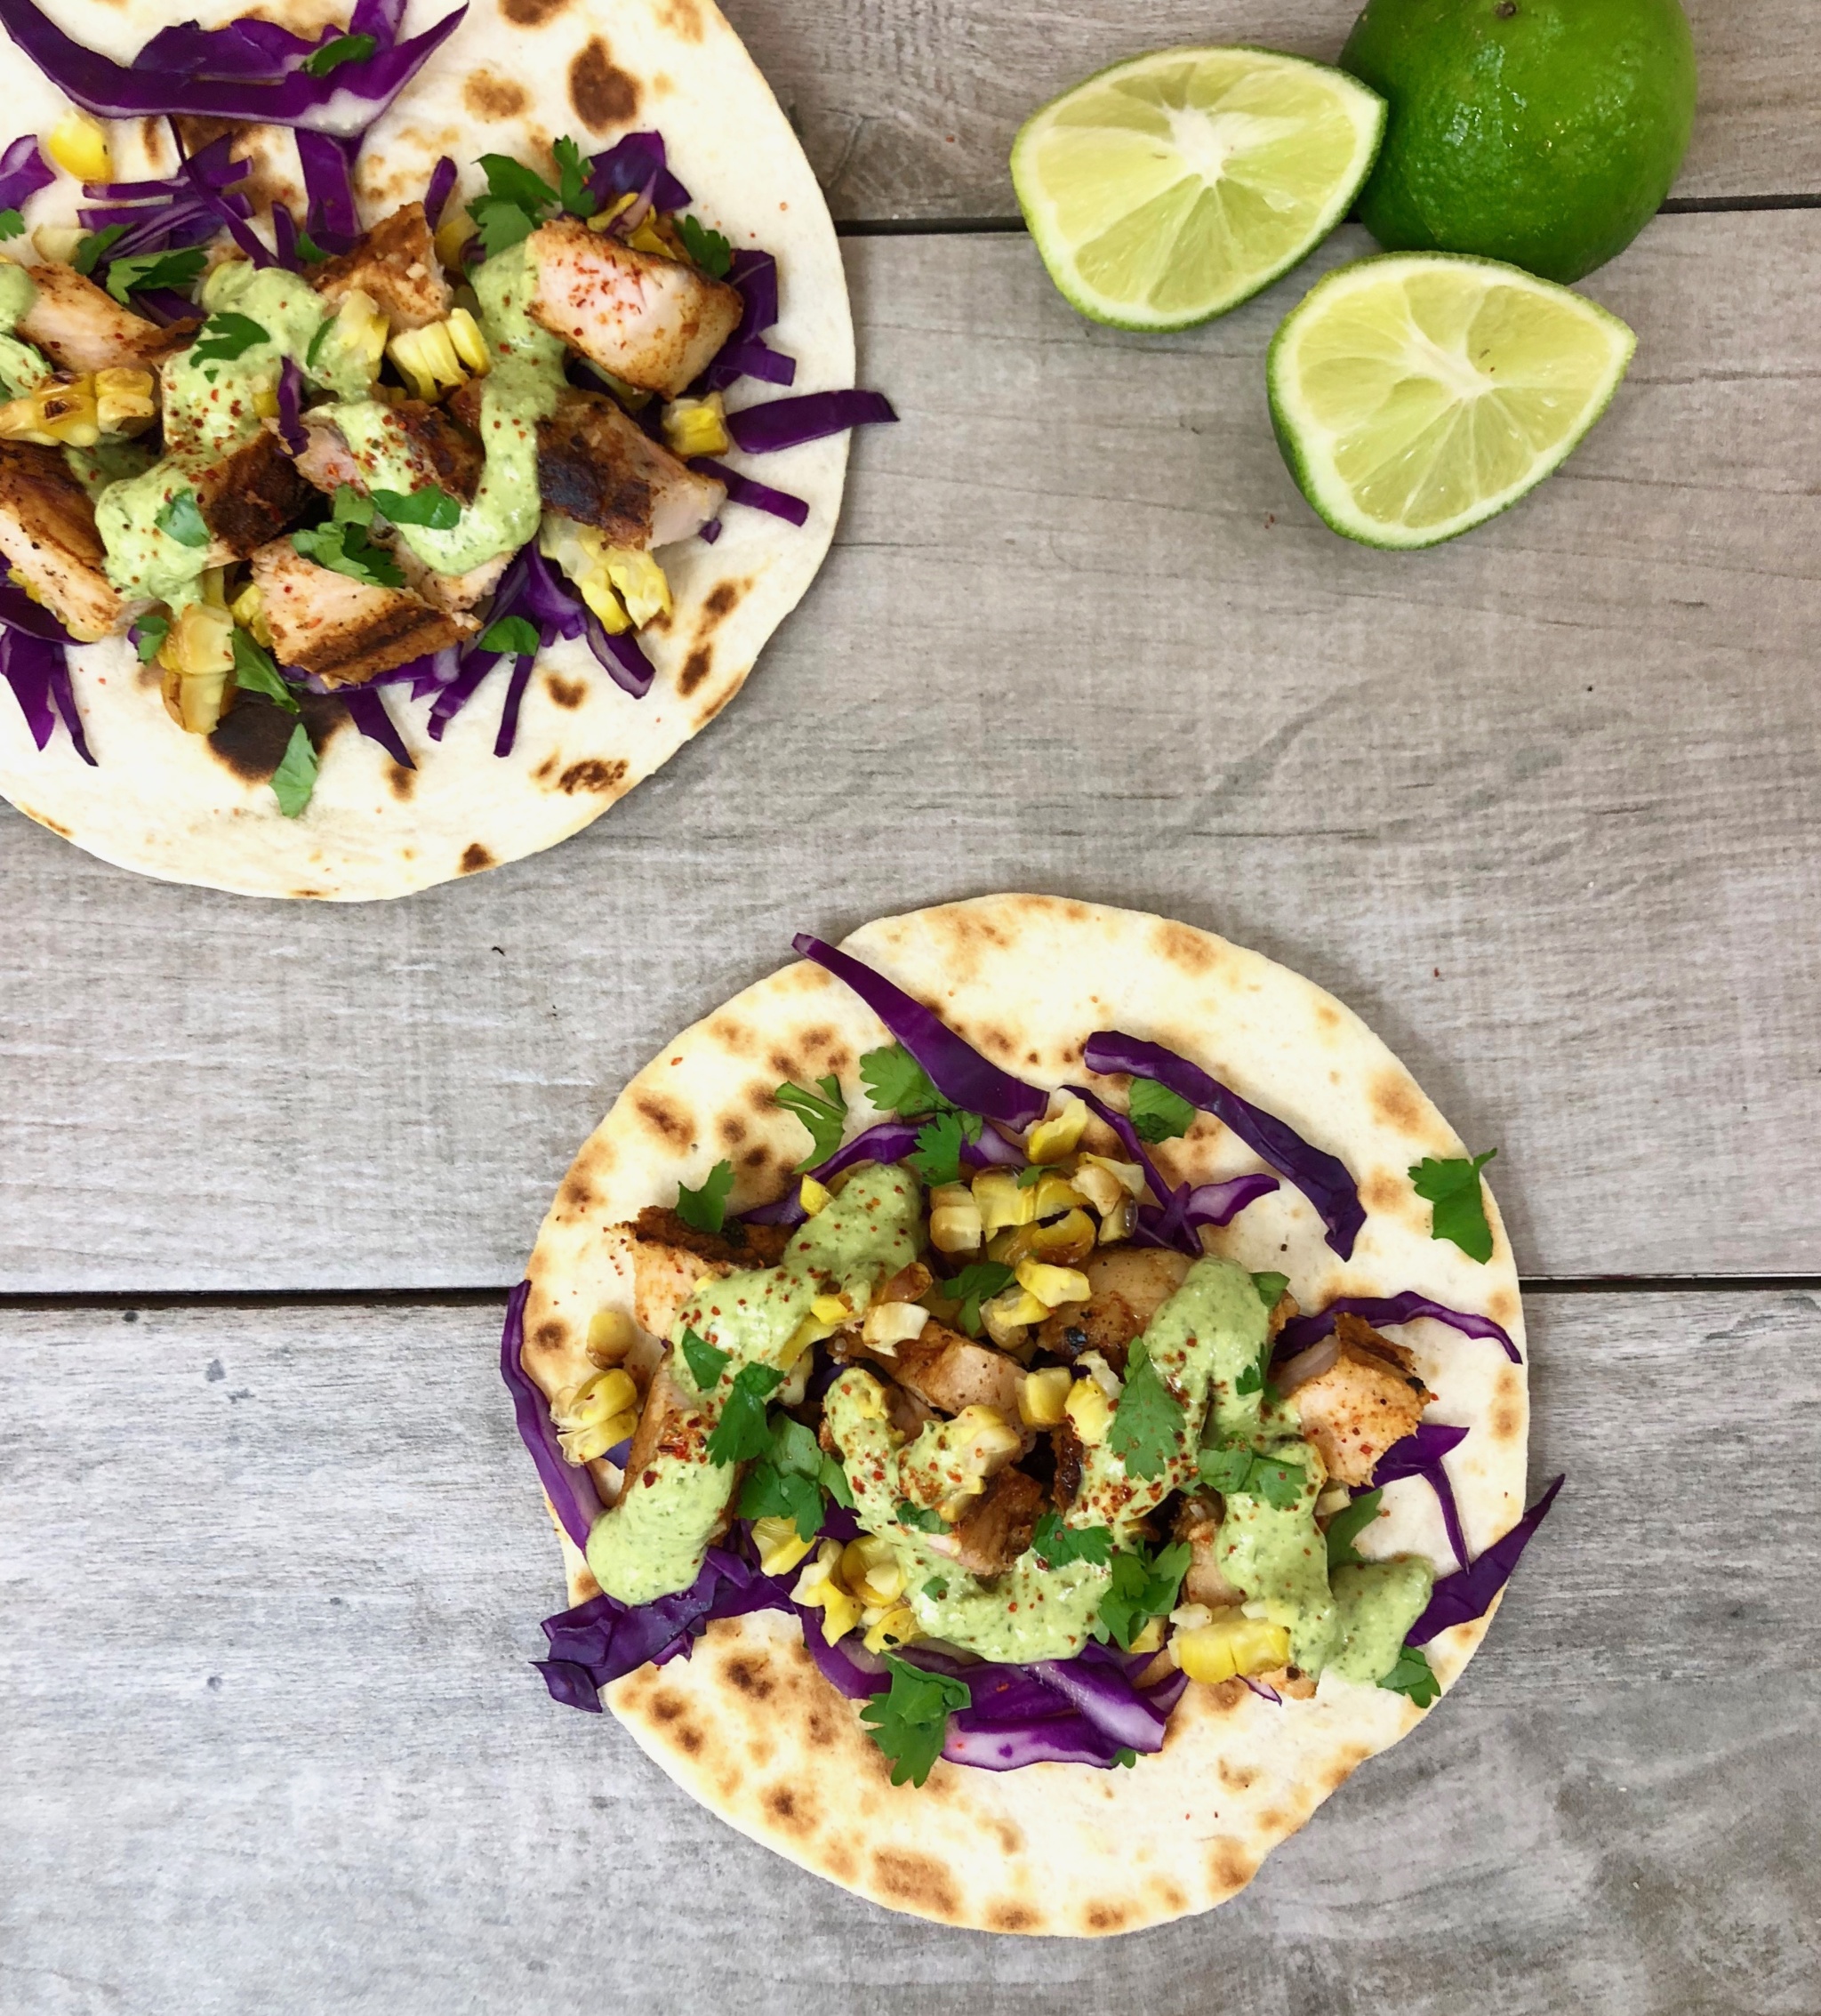 Chipotle Adobo Grilled Pork Tacos With Cilantro Lime Chimichurri